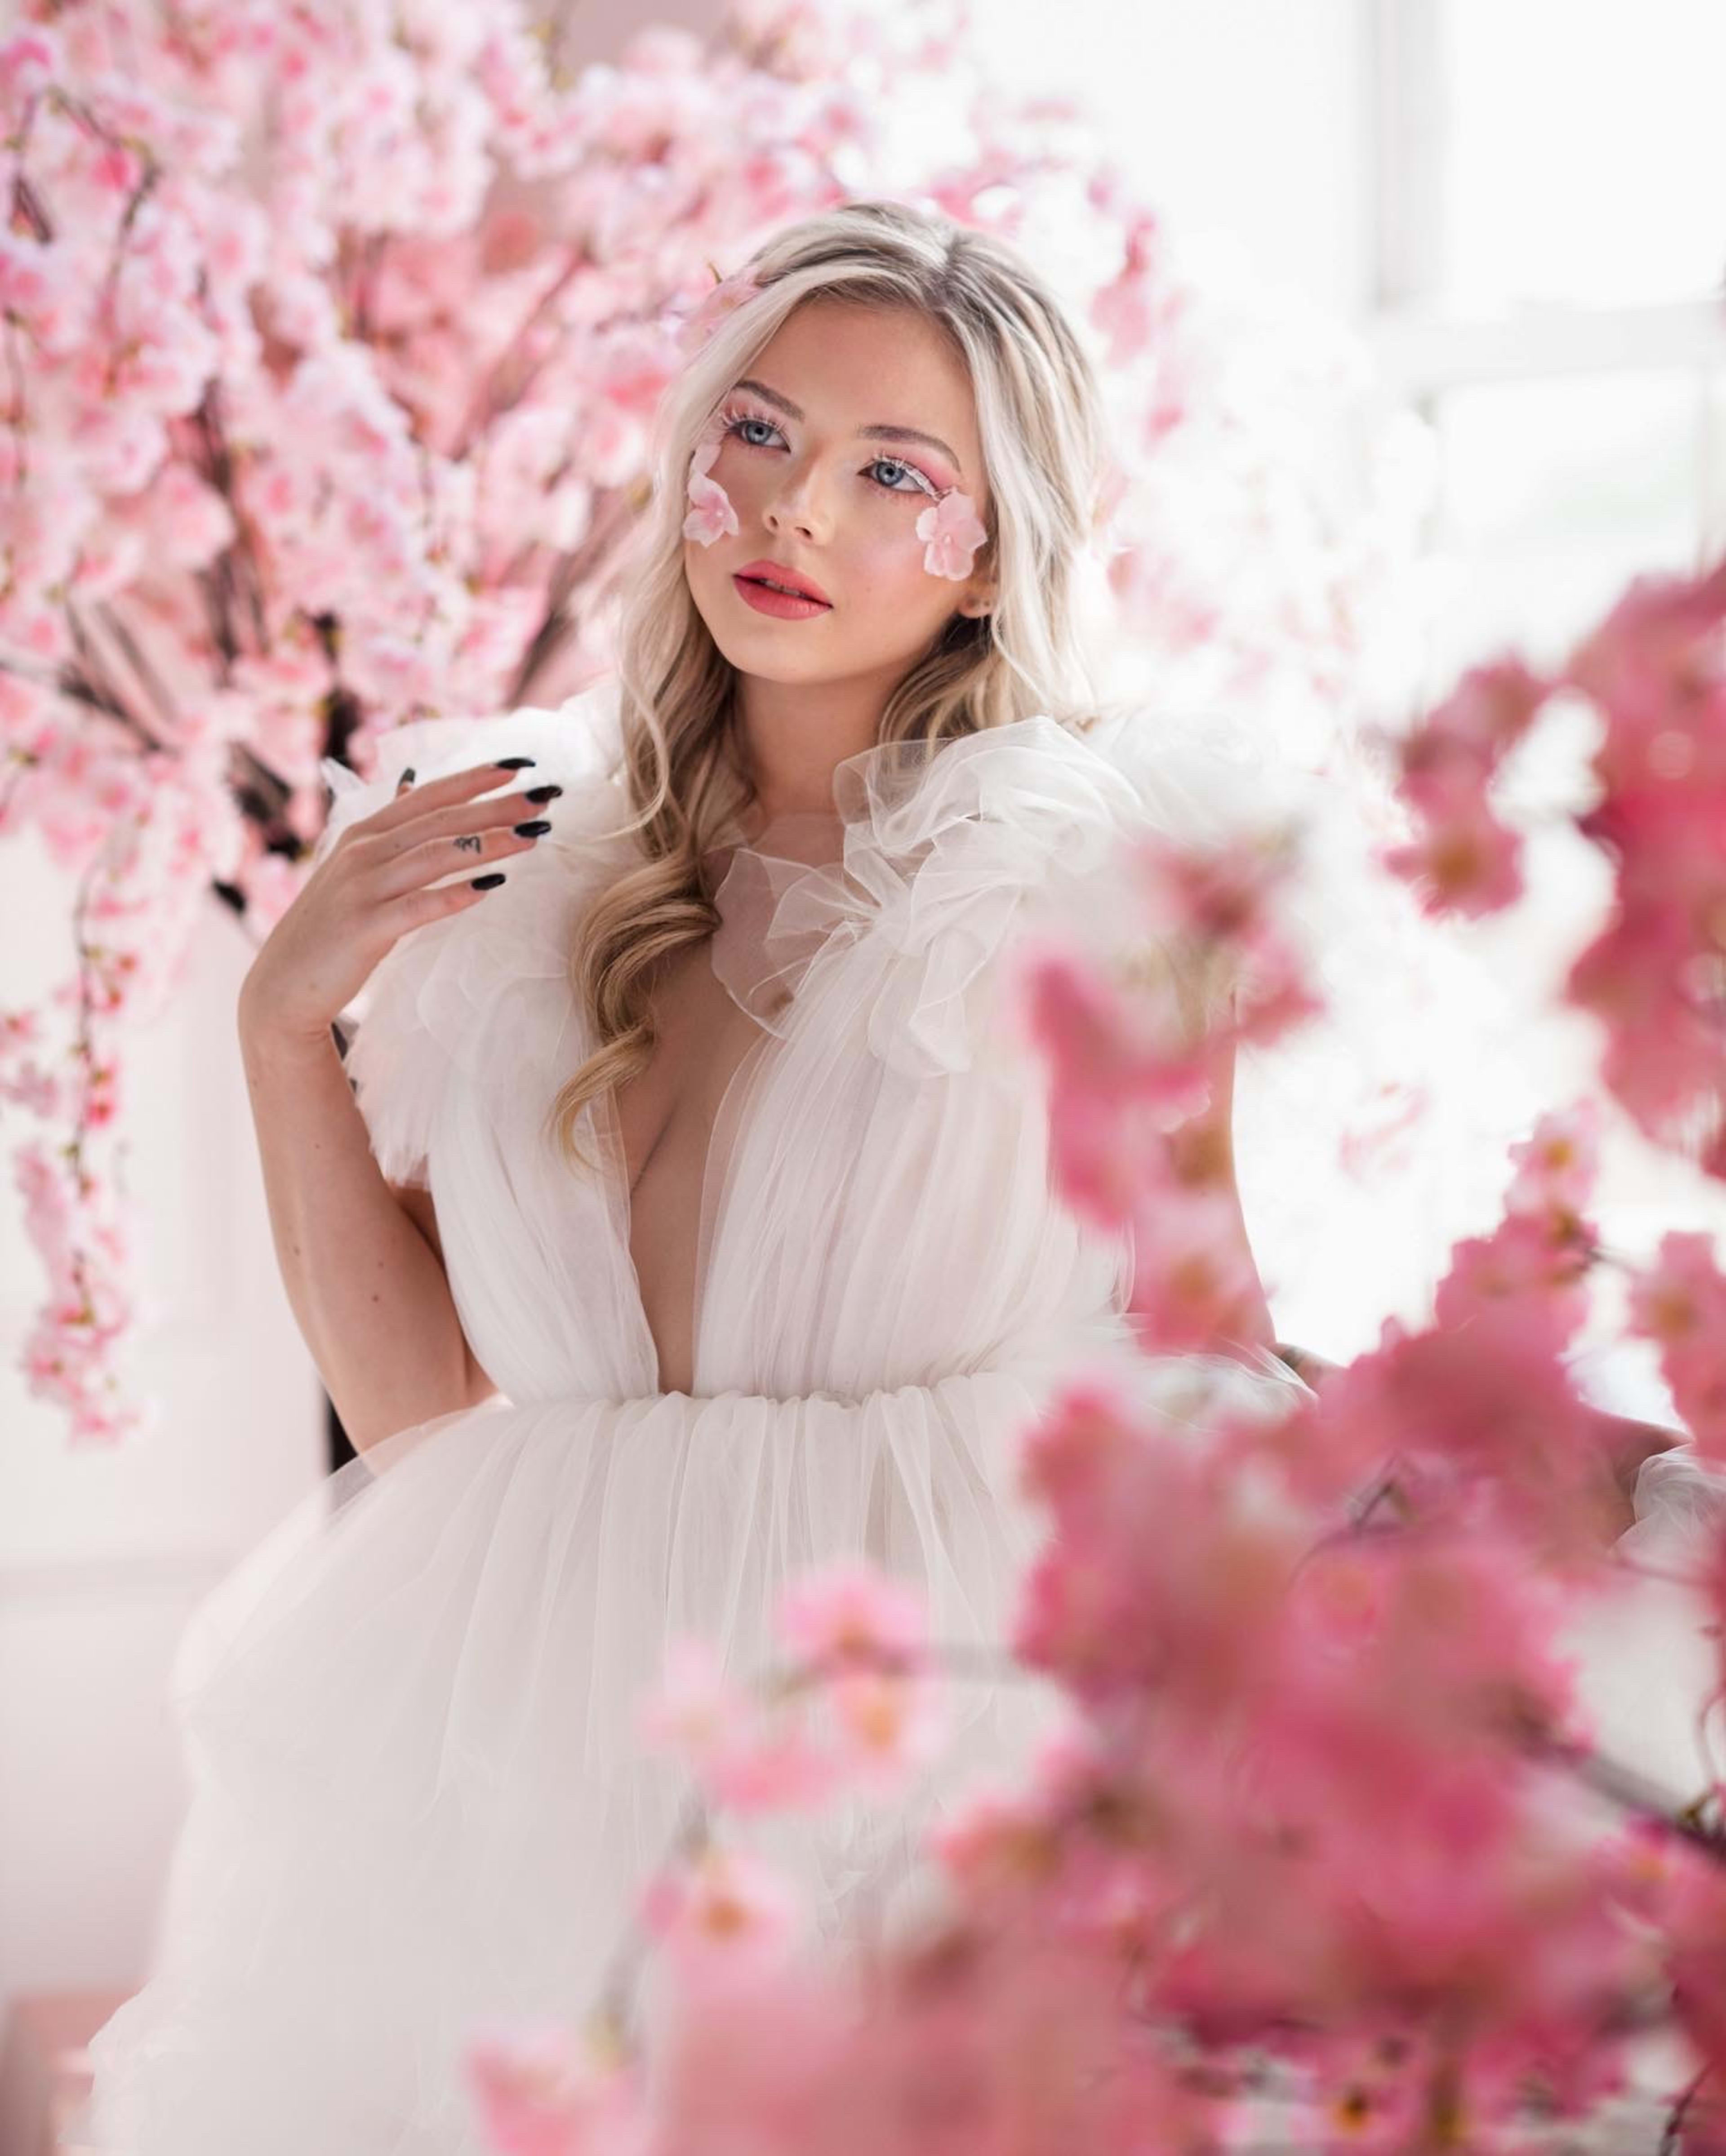 A spring fashion photoshoot featuring a woman in a white dress posing in front of pink flowers.